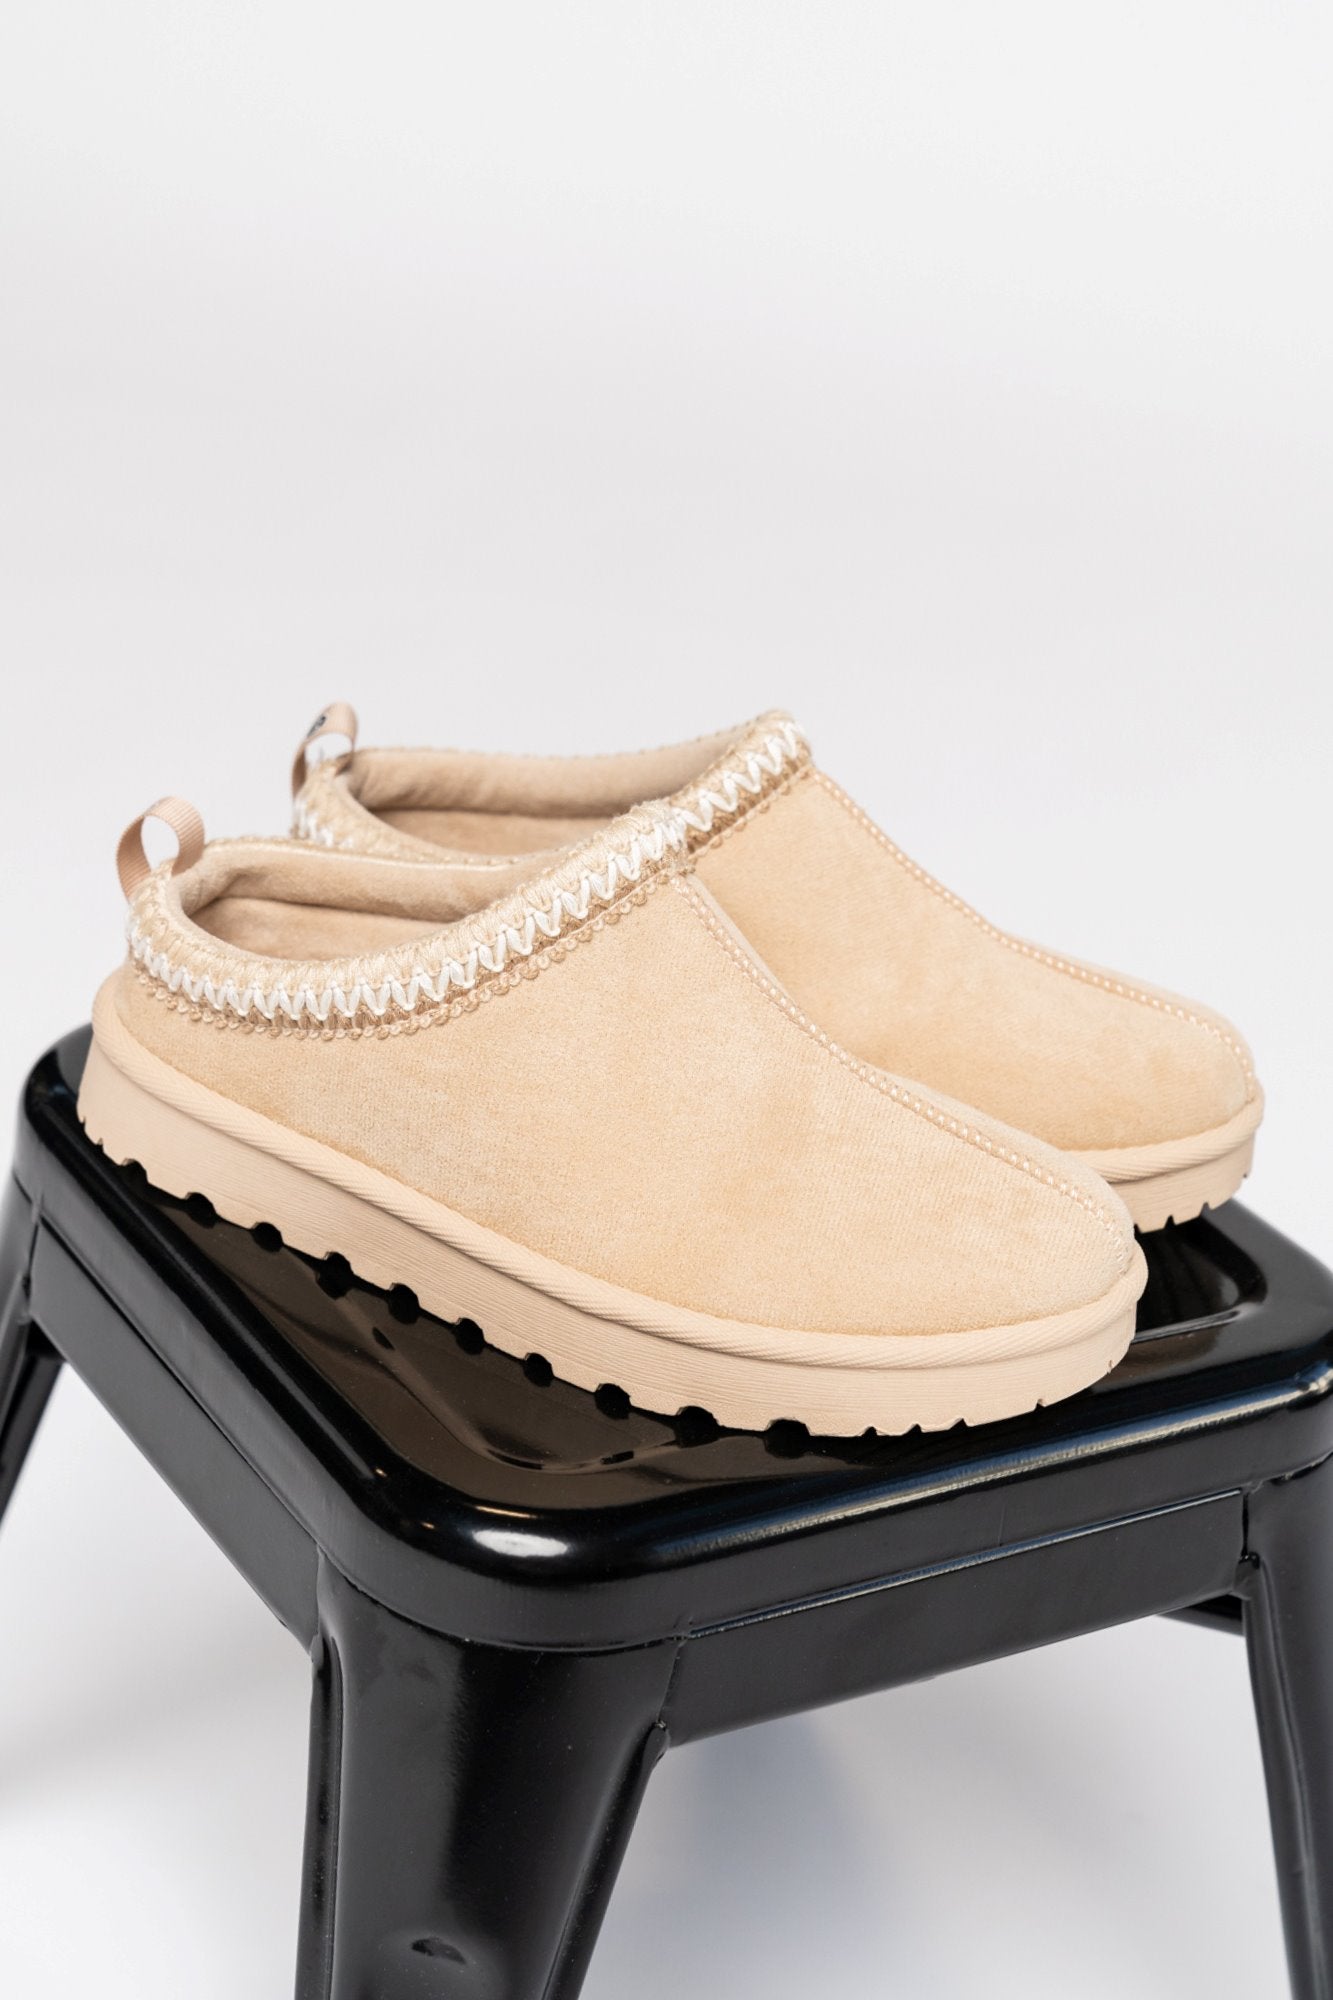 Landon Slippers in Fawn Holley Girl 